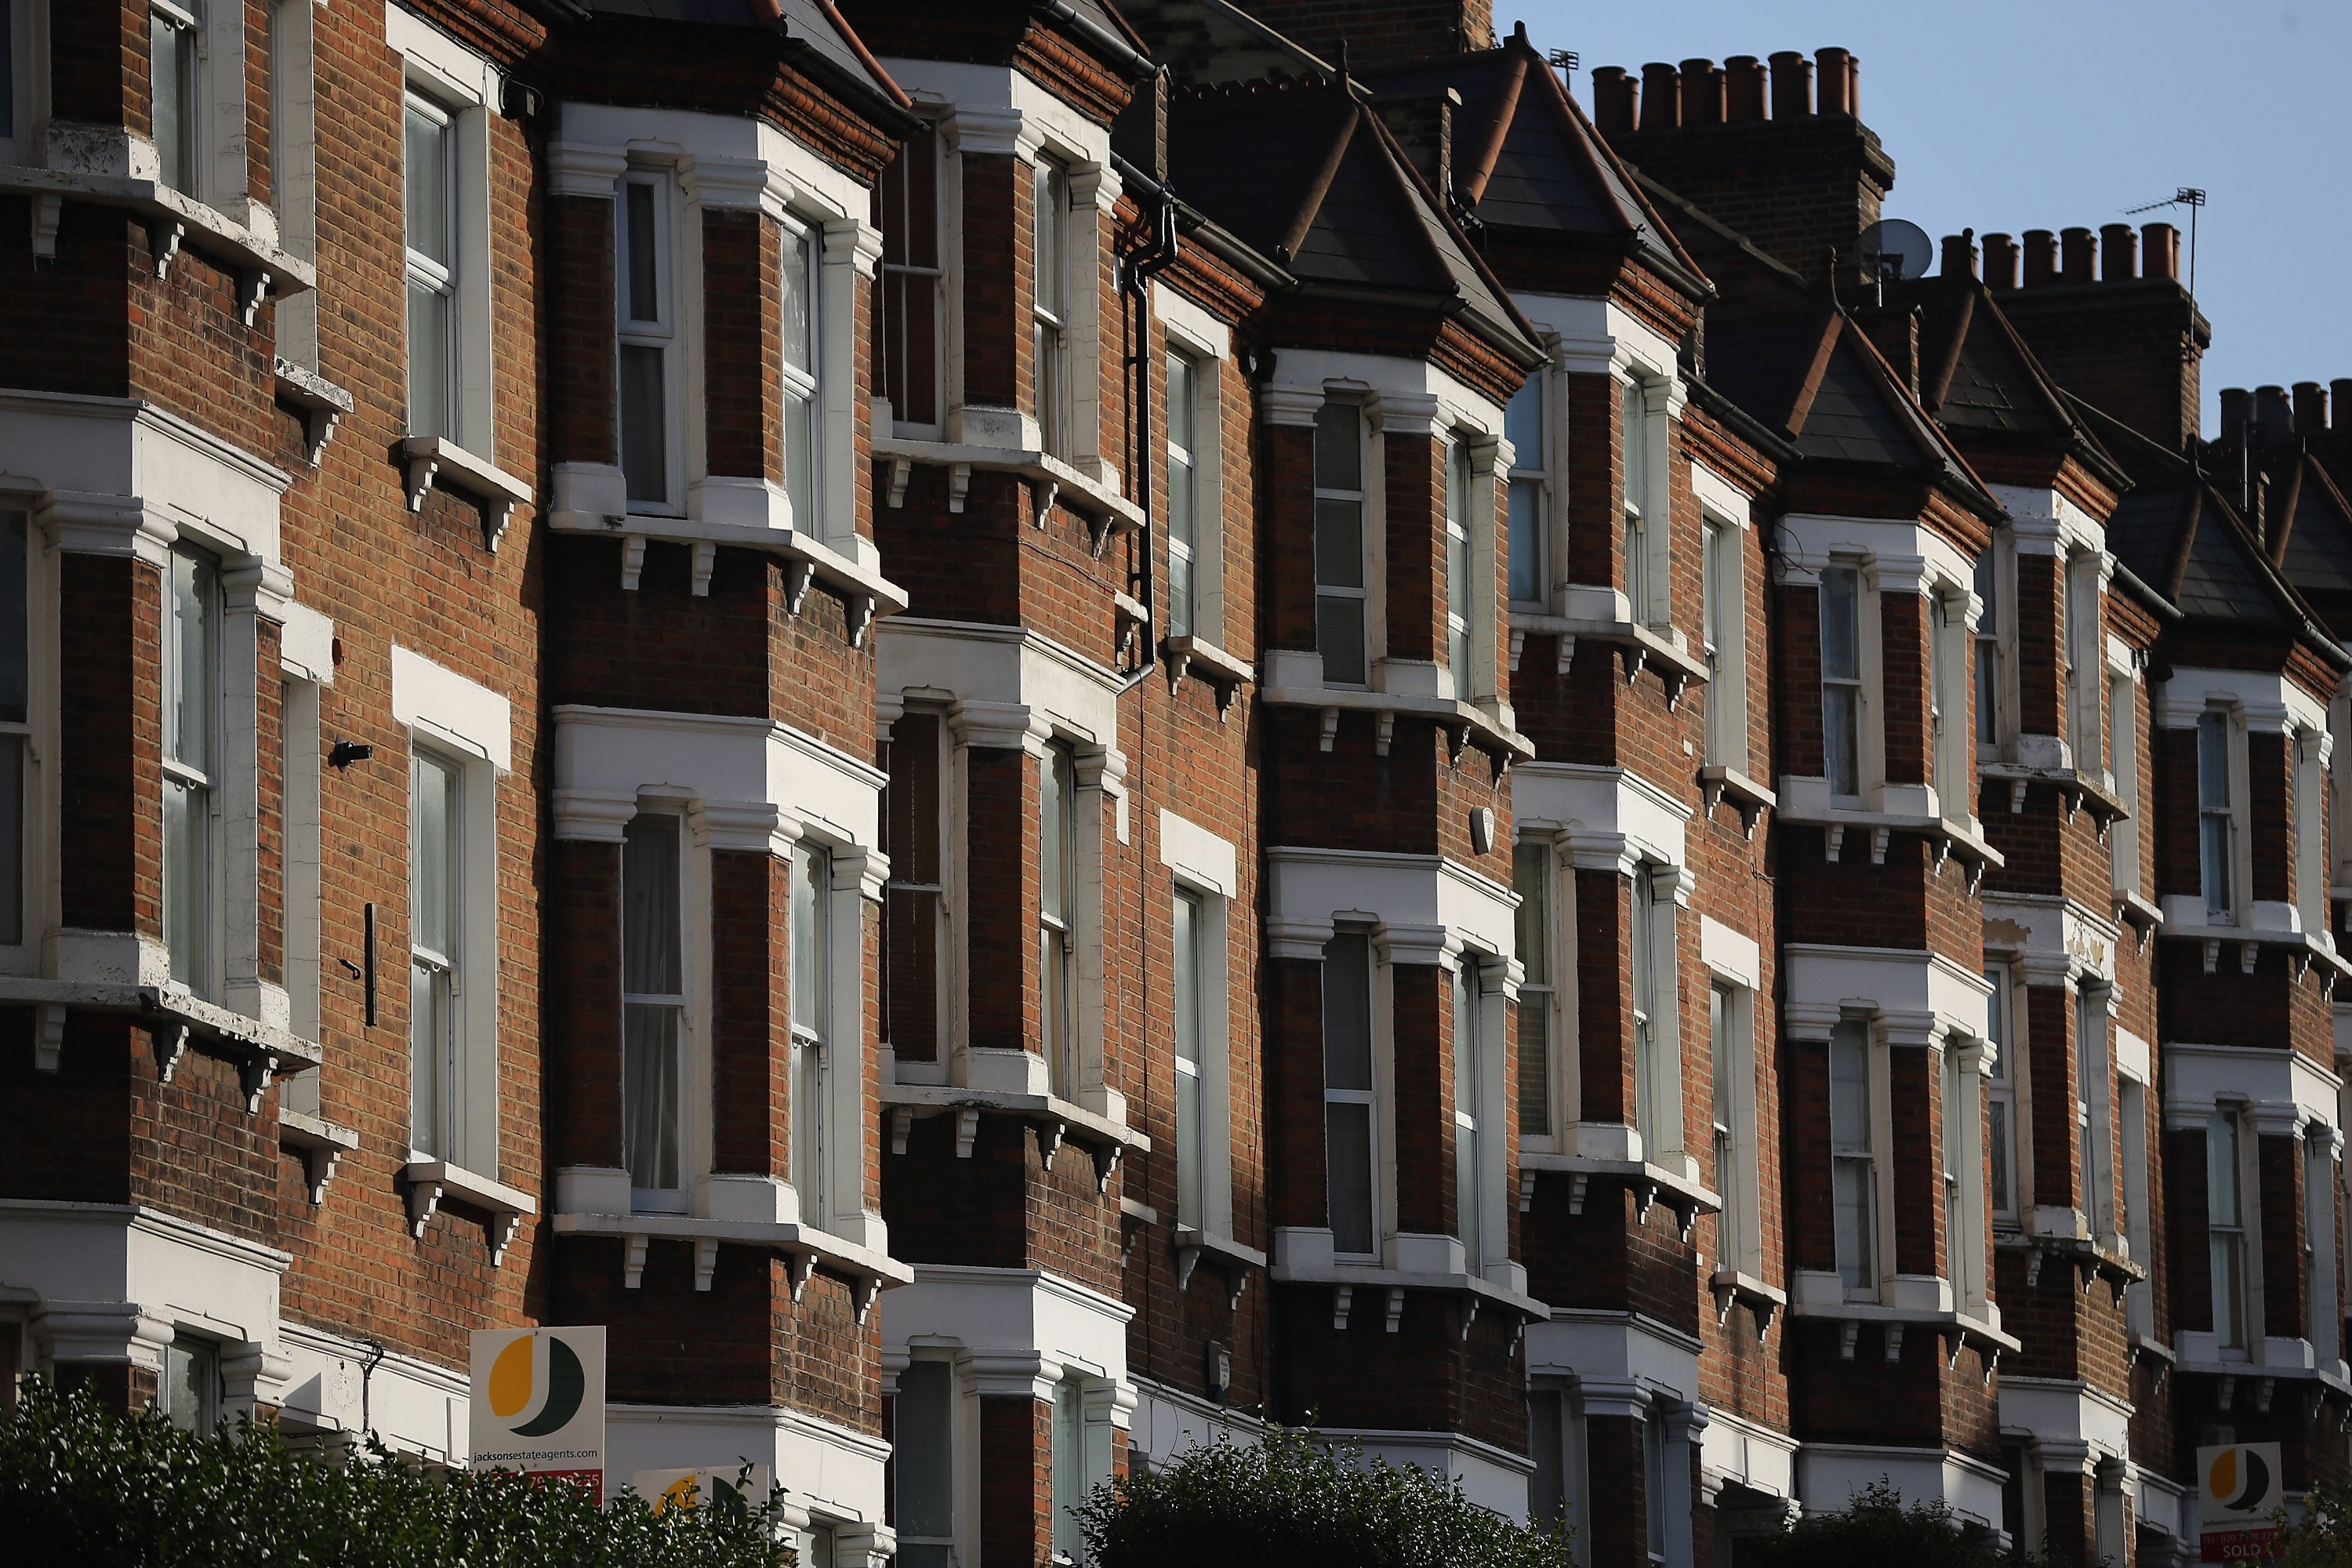 A row of houses in Battersea in Wandsworth, the London borough with the most new million-pound postcodes in the city